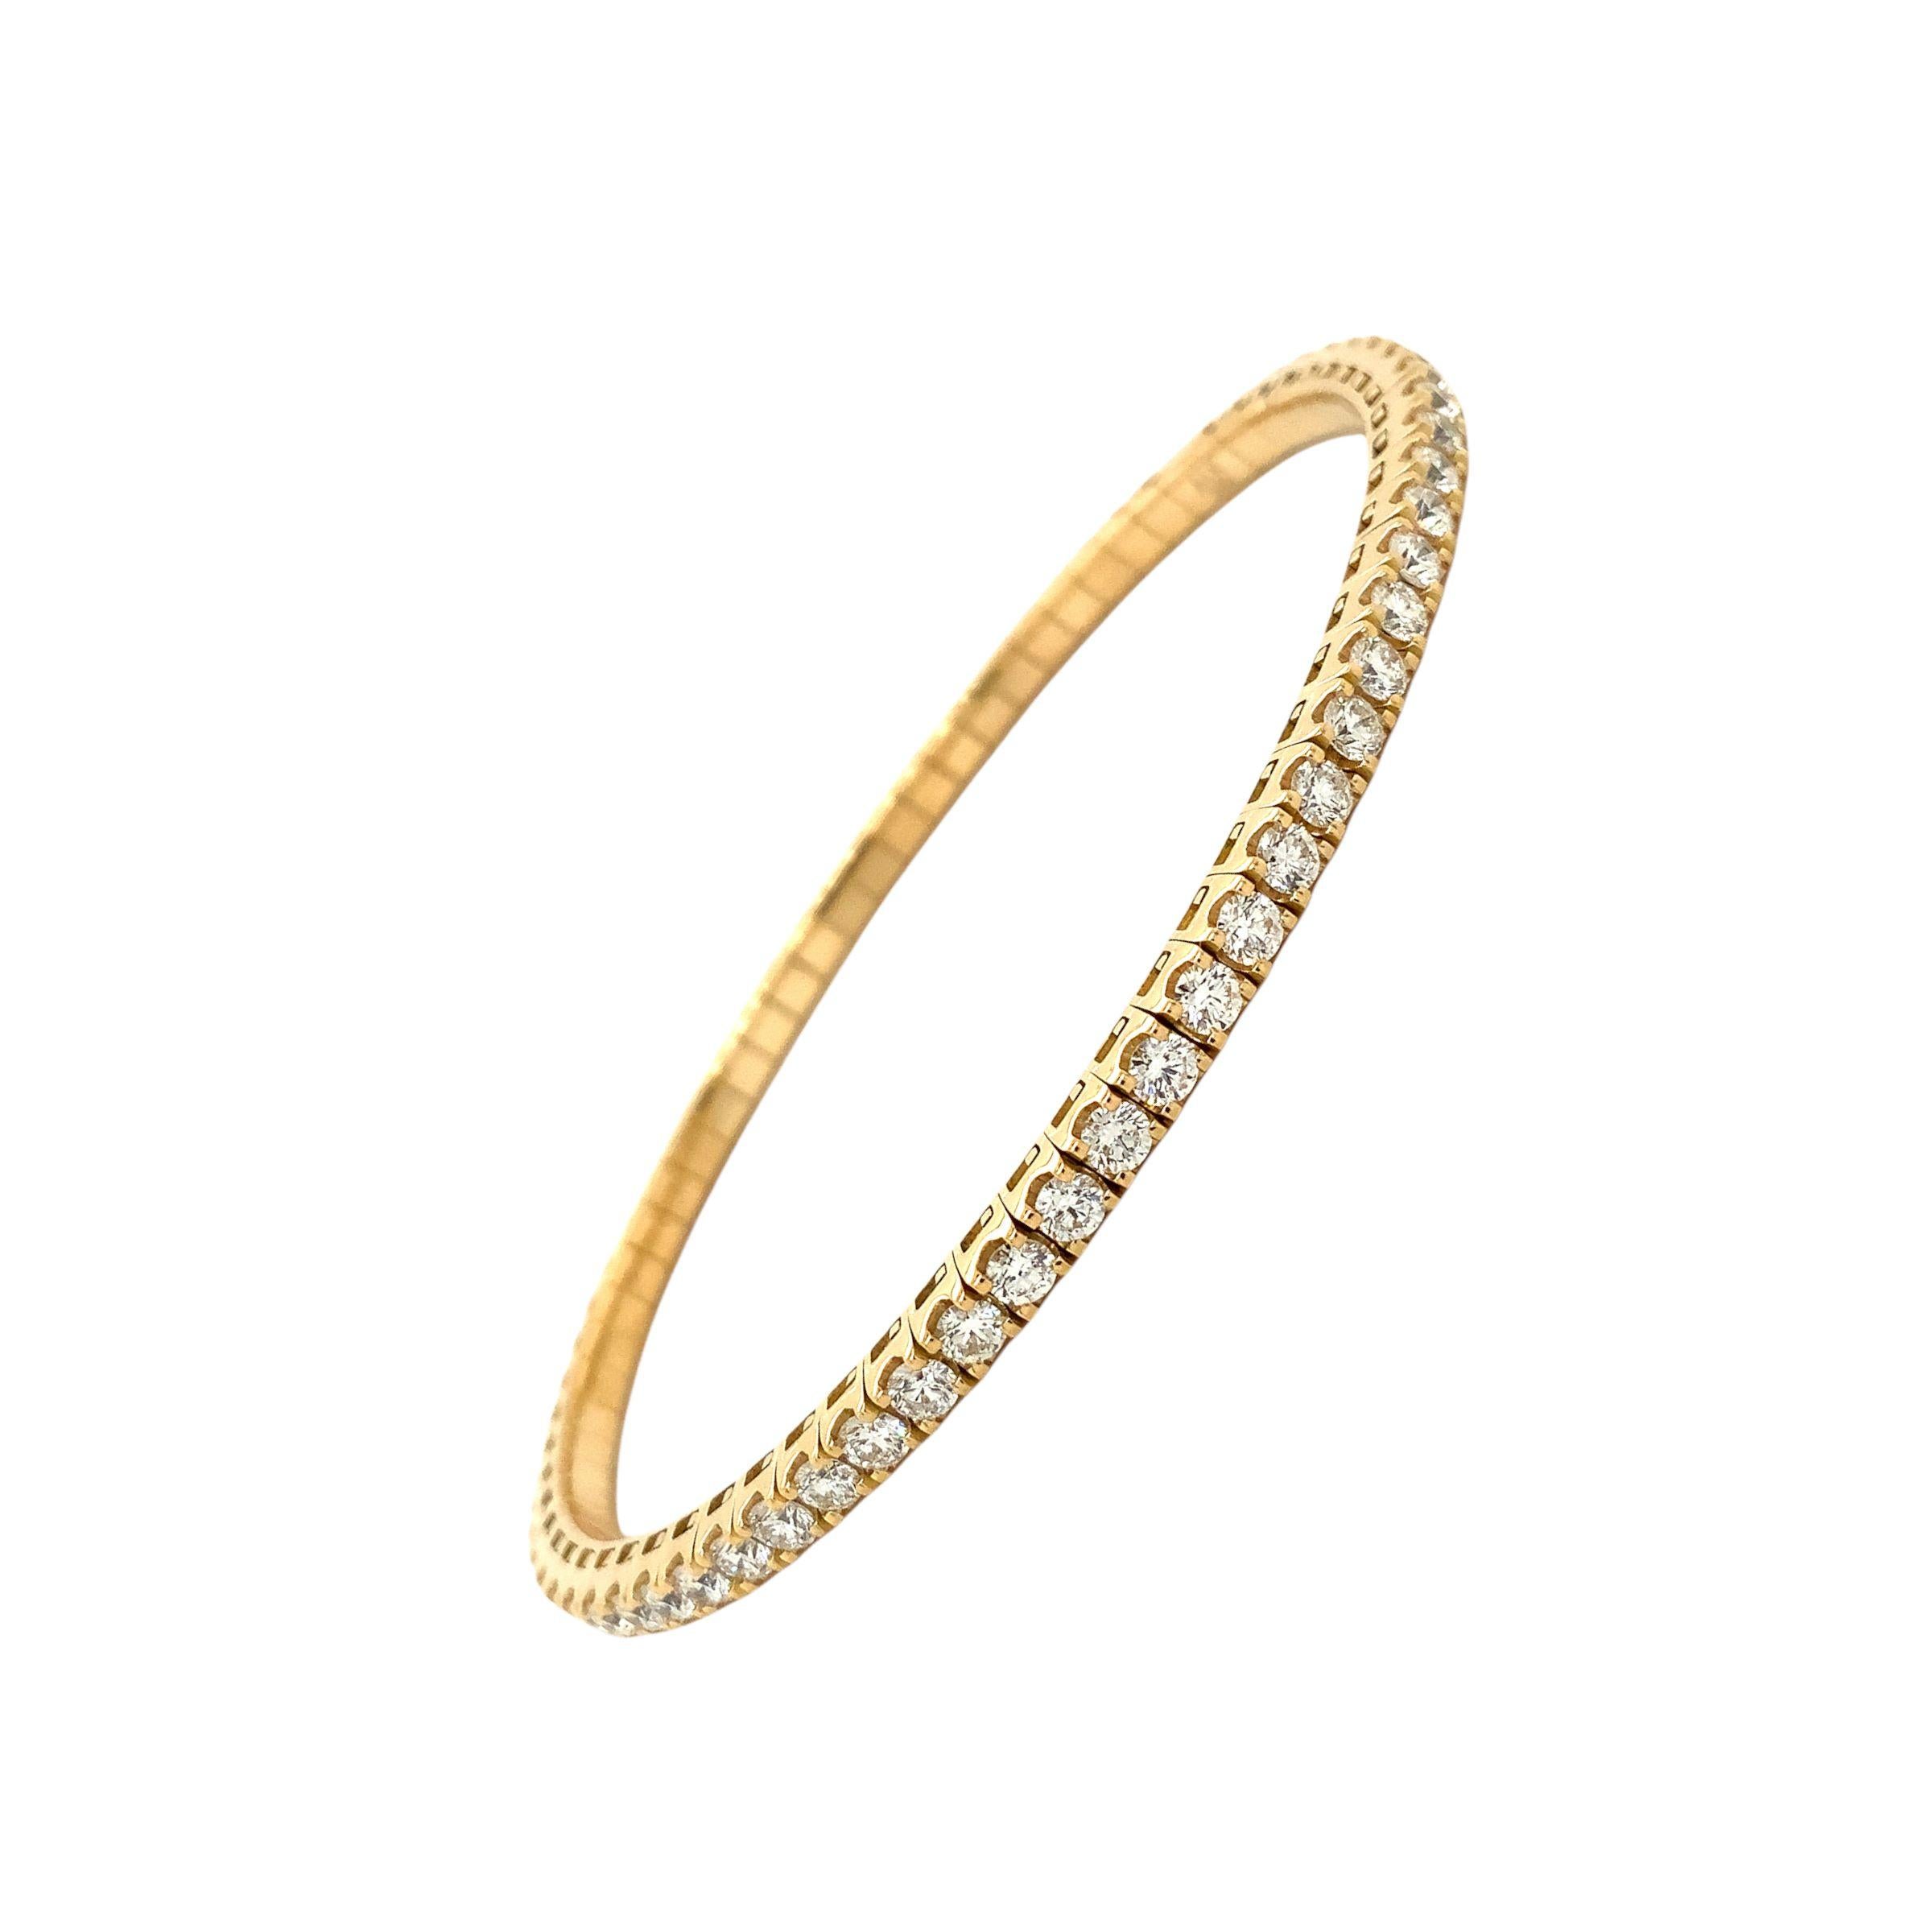 A Link Collection Stretchy Diamond Bracelet 3.44ct Set in 18K Yellow Gold.
This is so easy!  This Bracelet has no clasp it's super simple to put on and take off!
68 Round Brilliant Cut Diamond =3.44 cts. tw.
F in Color
VS in Clarity
Excellent Make